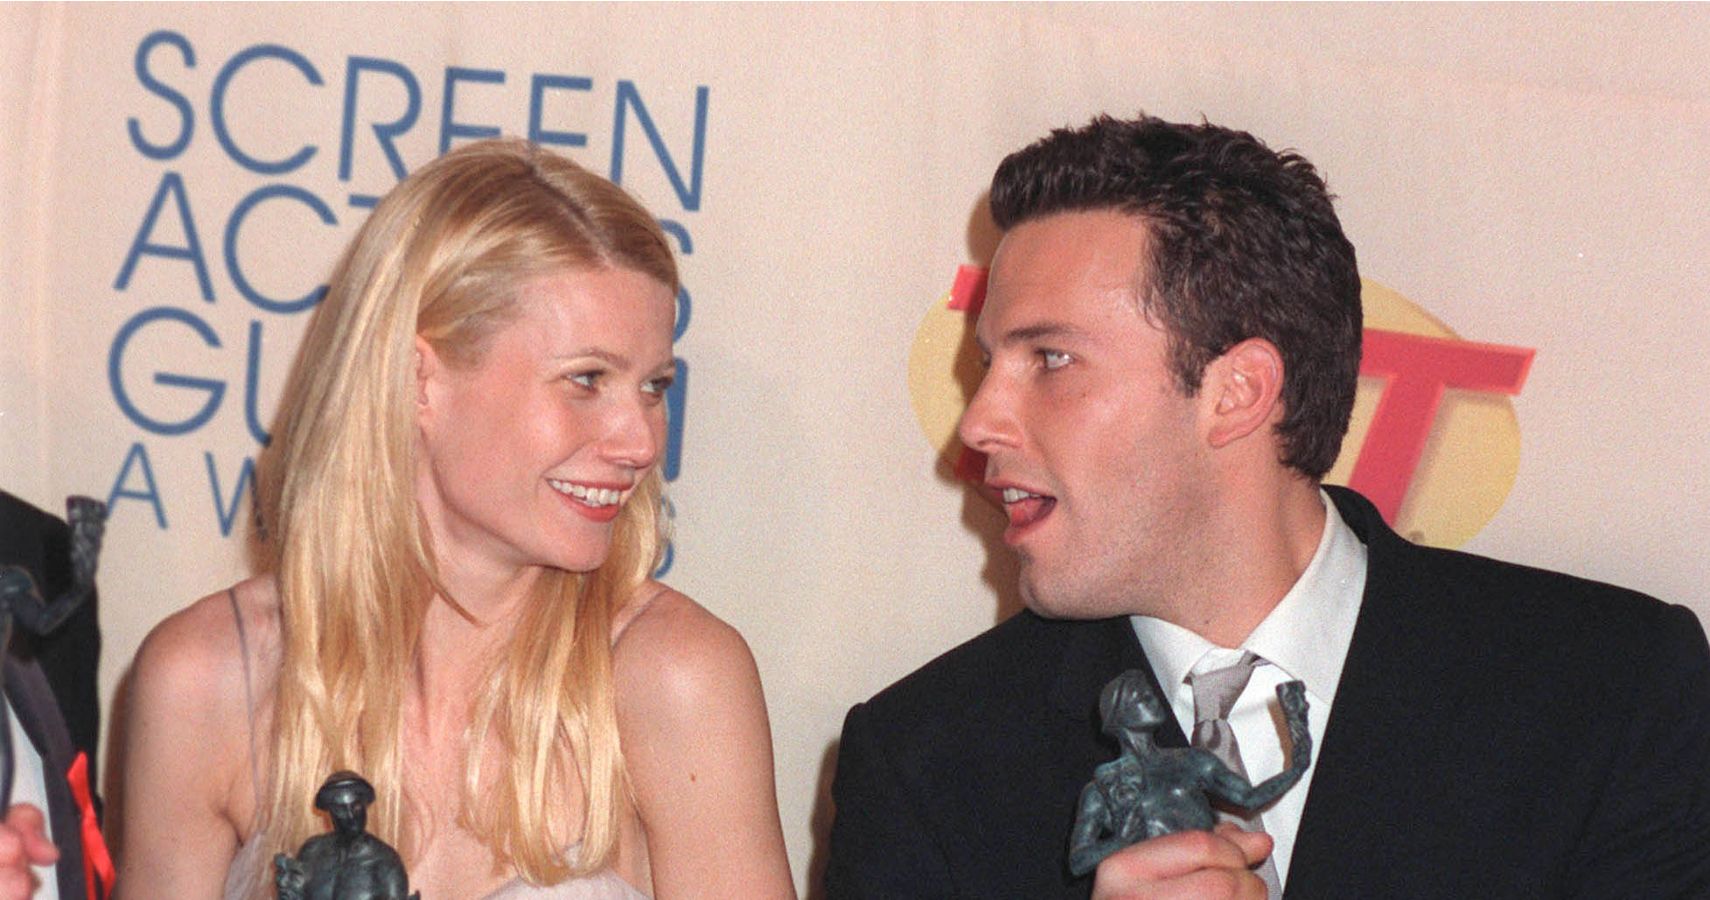 Gwyneth Paltrow and Ben Affleck Staring At Each Other